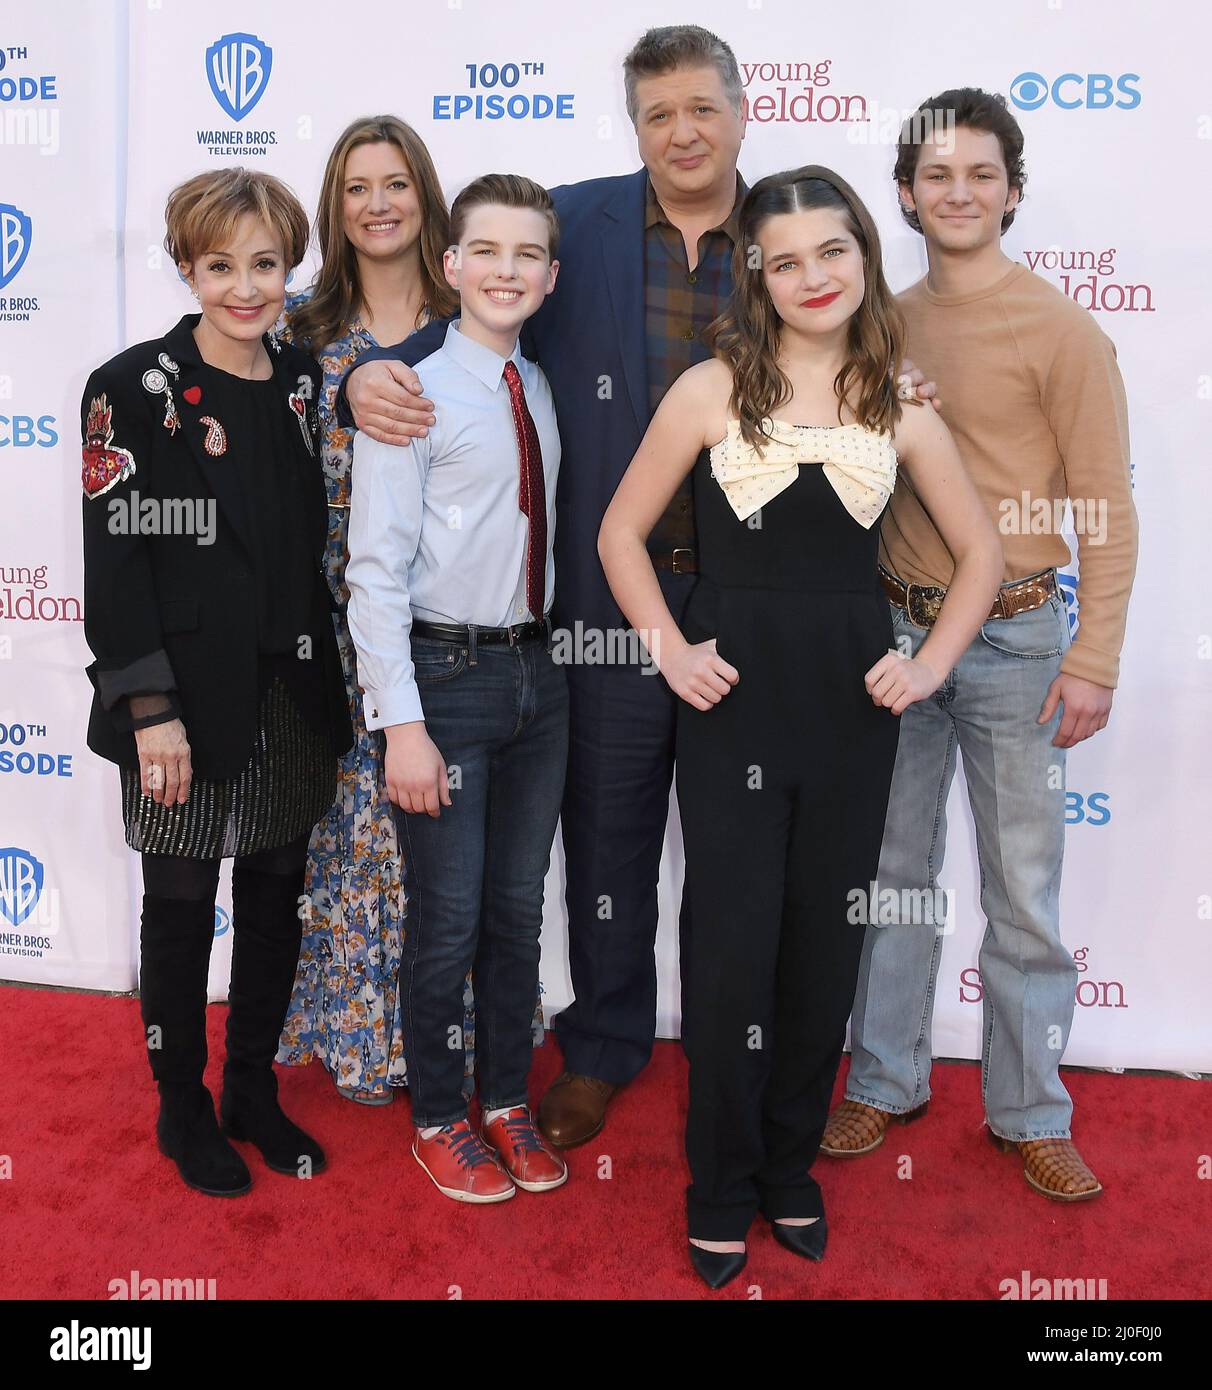 Los Angeles, USA. 18th Mar, 2022. (L-R) YOUNG SHELDON Cast - Annie Potts, Zoe Perry, Ian Armitage, Lance Barber, Raegan Revford and Montana Jordan at the Premiere Of Warner Bros. 100th Episode Of YOUNG SHELDON held at the Warner Bros. Studios in Burbank, CA on Friday, ?March 18, 2022. (Photo By Sthanlee B. Mirador/Sipa USA) Credit: Sipa USA/Alamy Live News Stock Photo